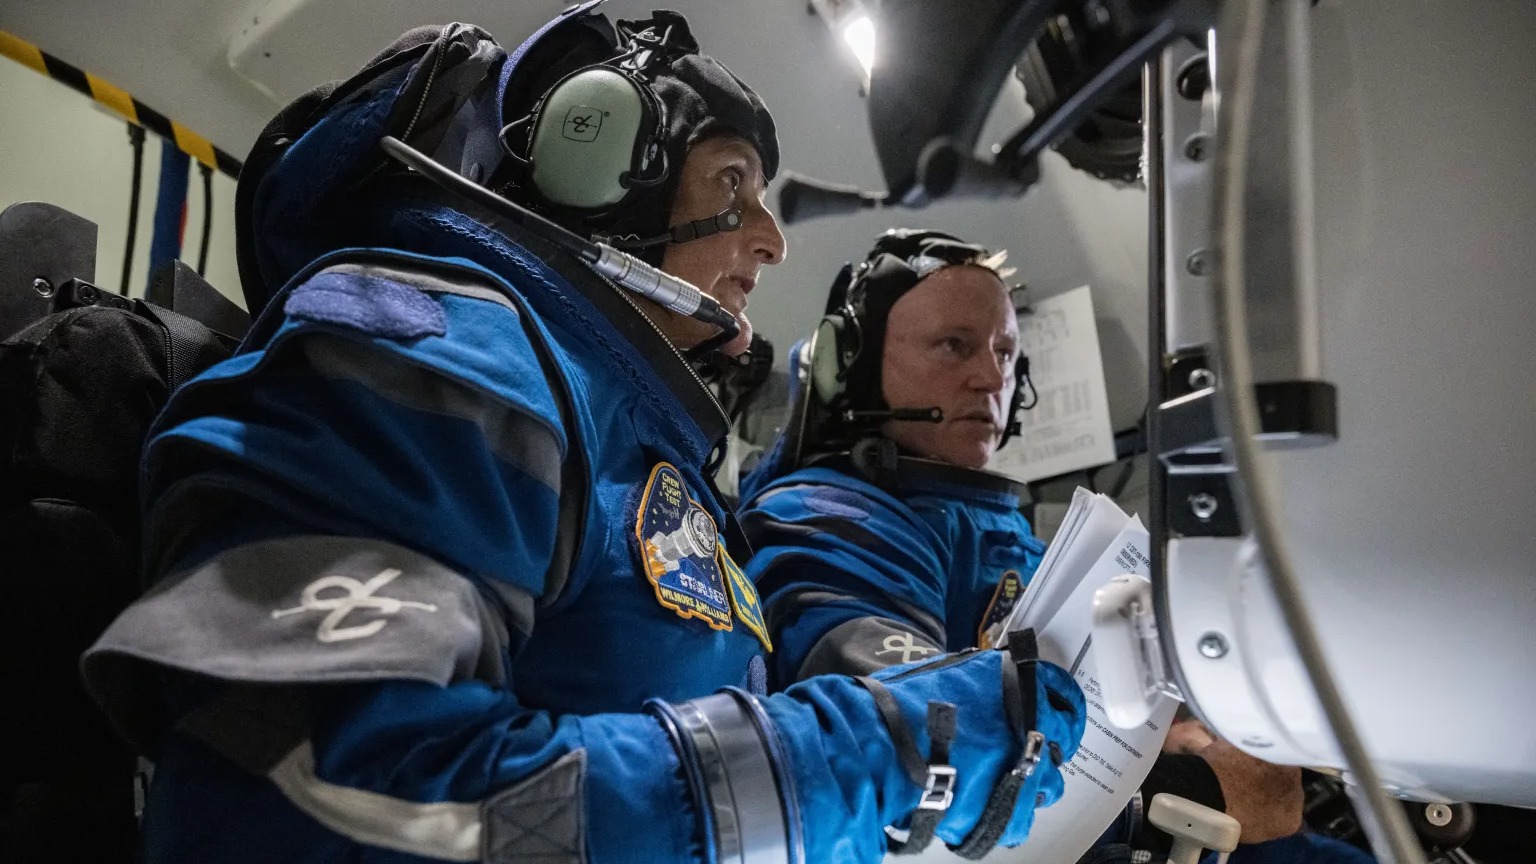 two astronauts in training in a simulator with spacesuits on, looking at a screen